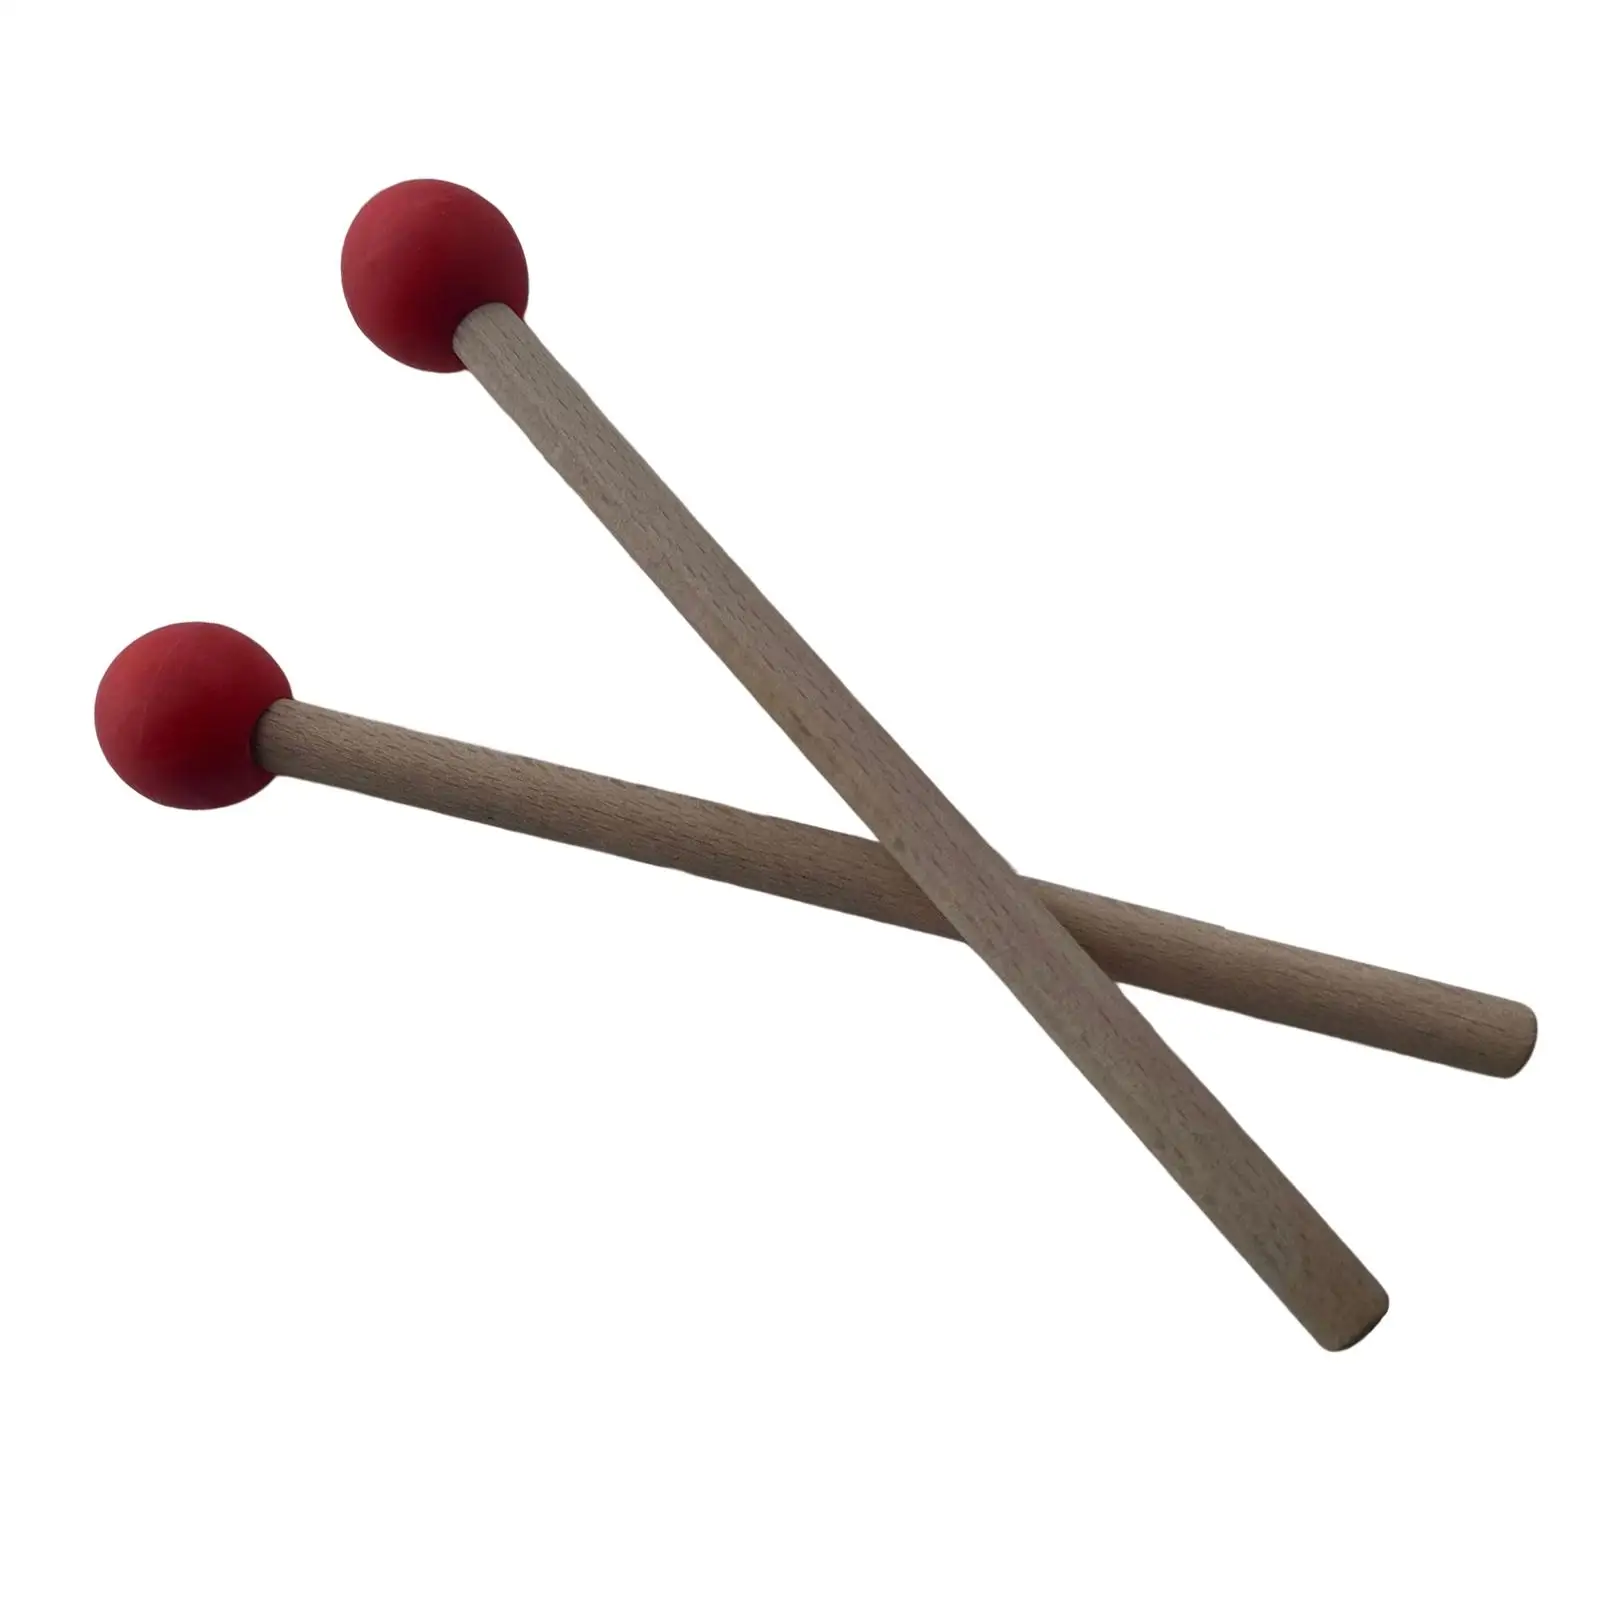 2 pieces rubber drum mallets with wooden handle Percussion Xylophone Bell